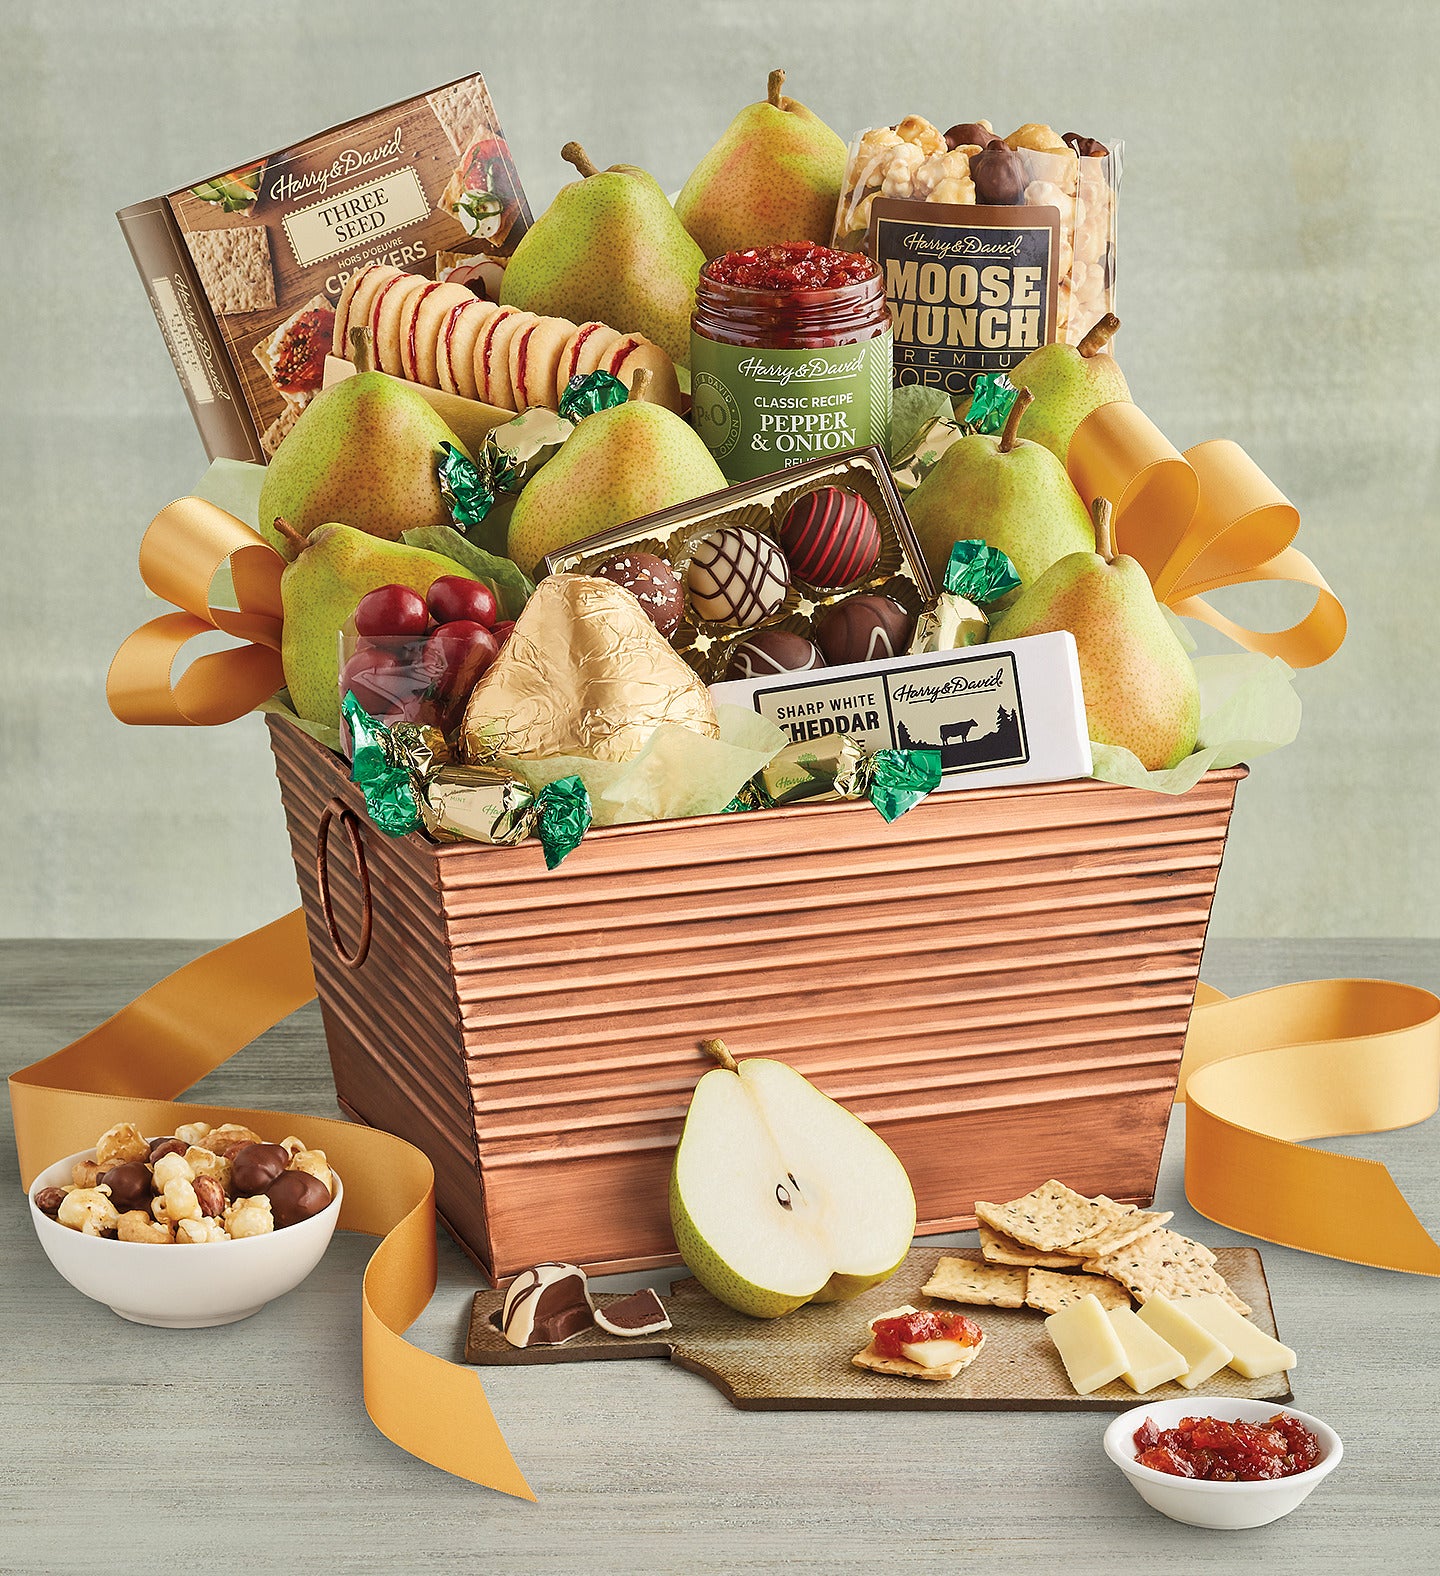 Design It Yourself - How To Make A Gourmet Italian Gift Basket - DeLallo